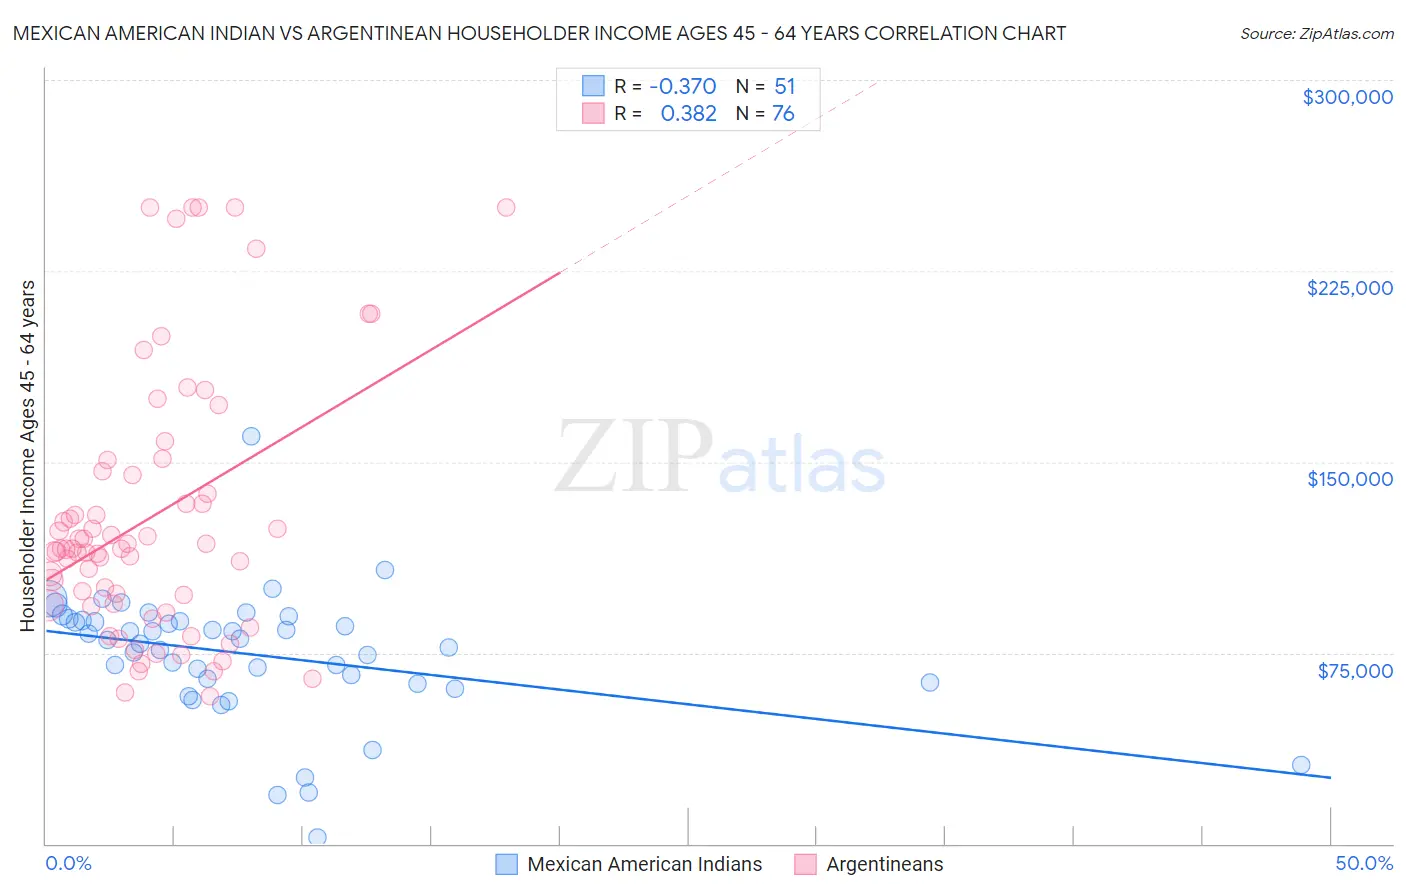 Mexican American Indian vs Argentinean Householder Income Ages 45 - 64 years